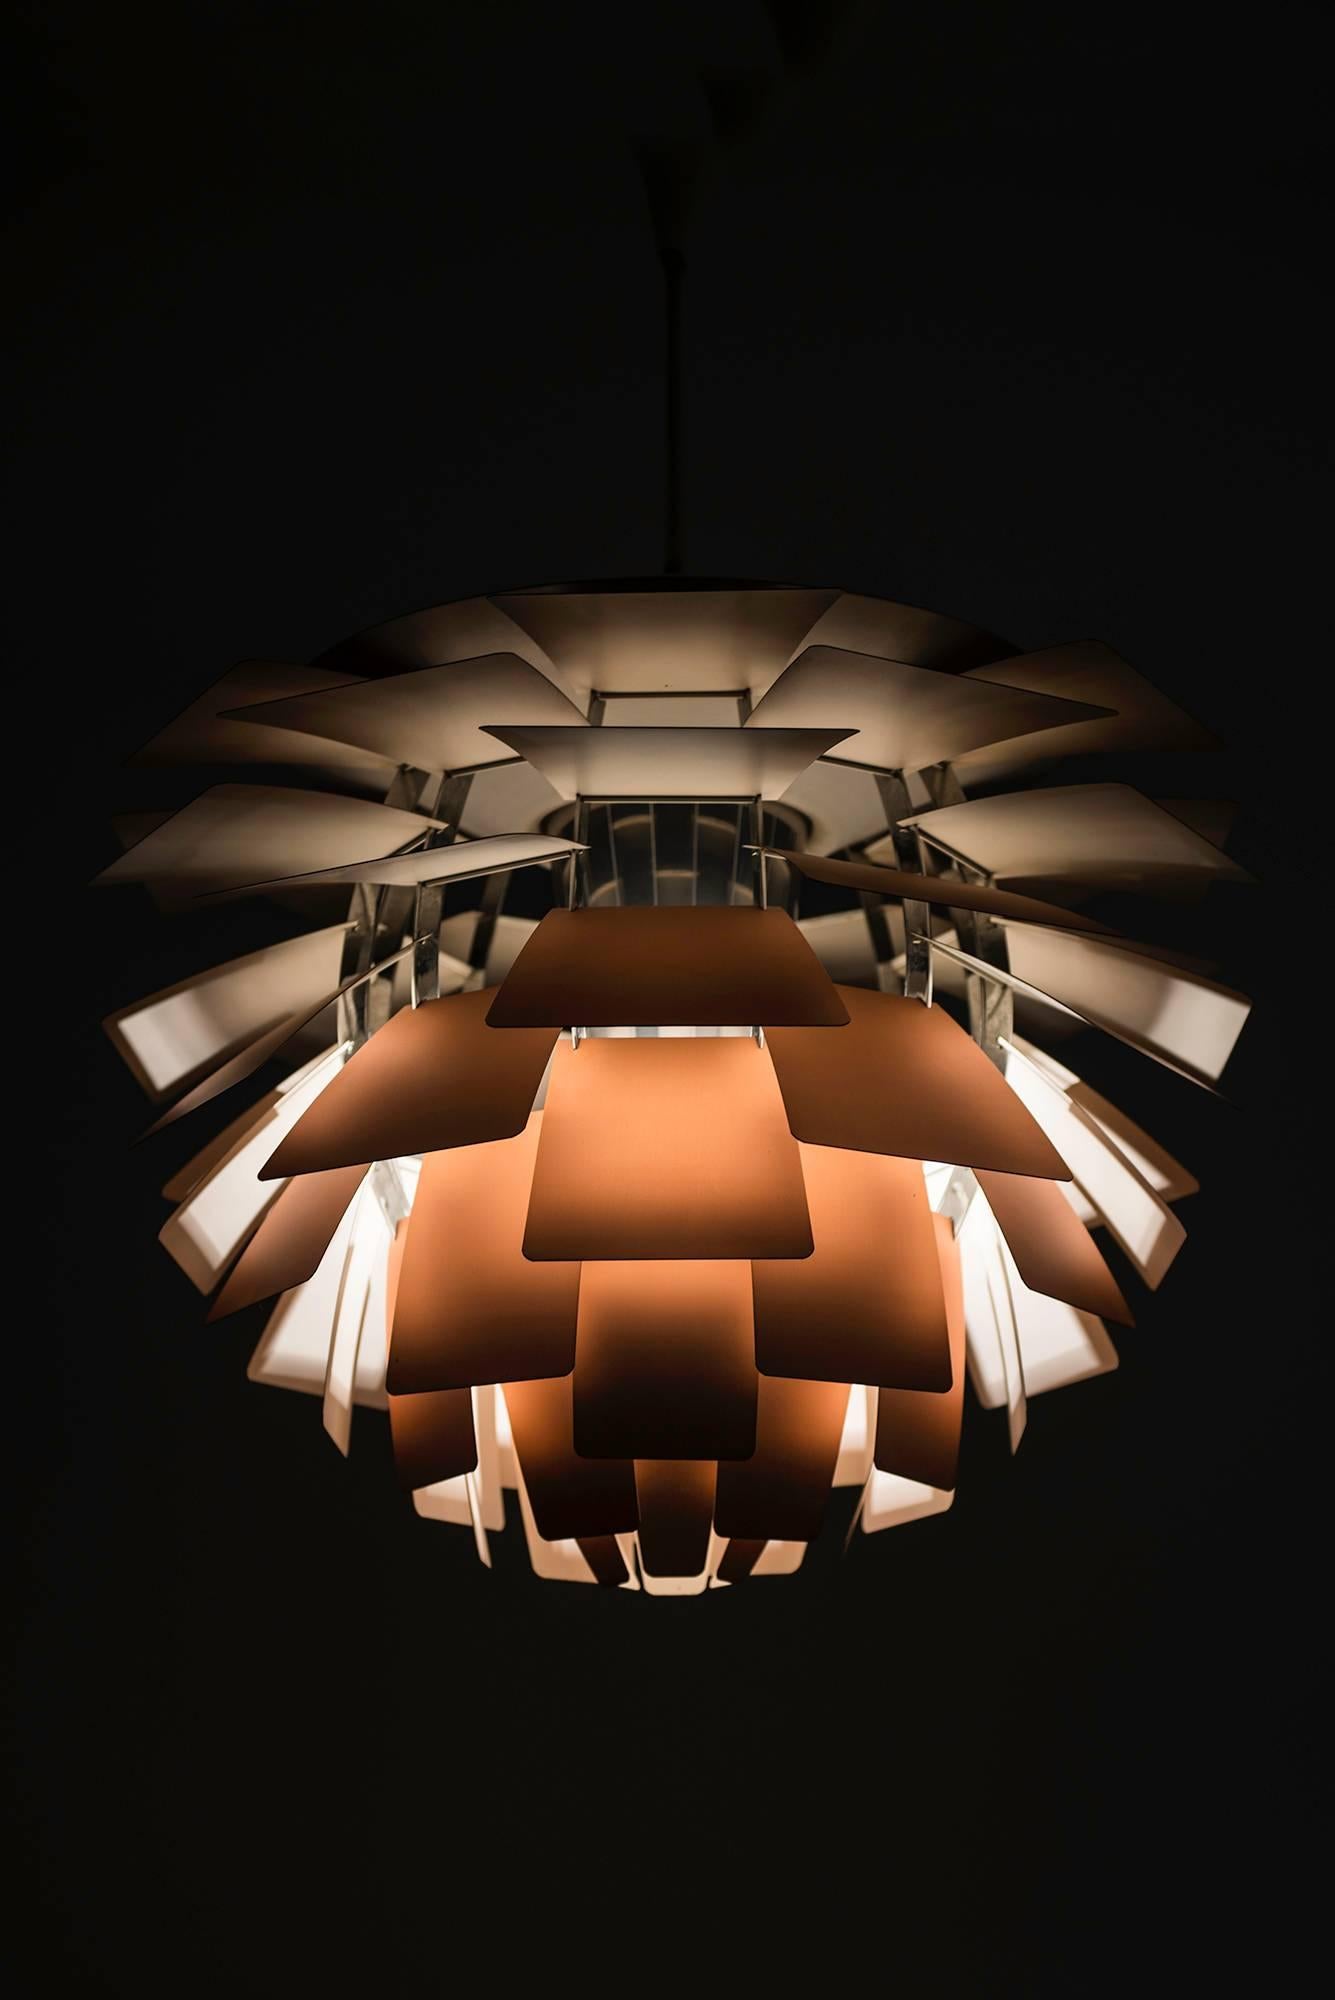 Rare and early Artichoke ceiling lamp designed by Poul Henningsen. Produced by Louis Poulsen in Denmark.